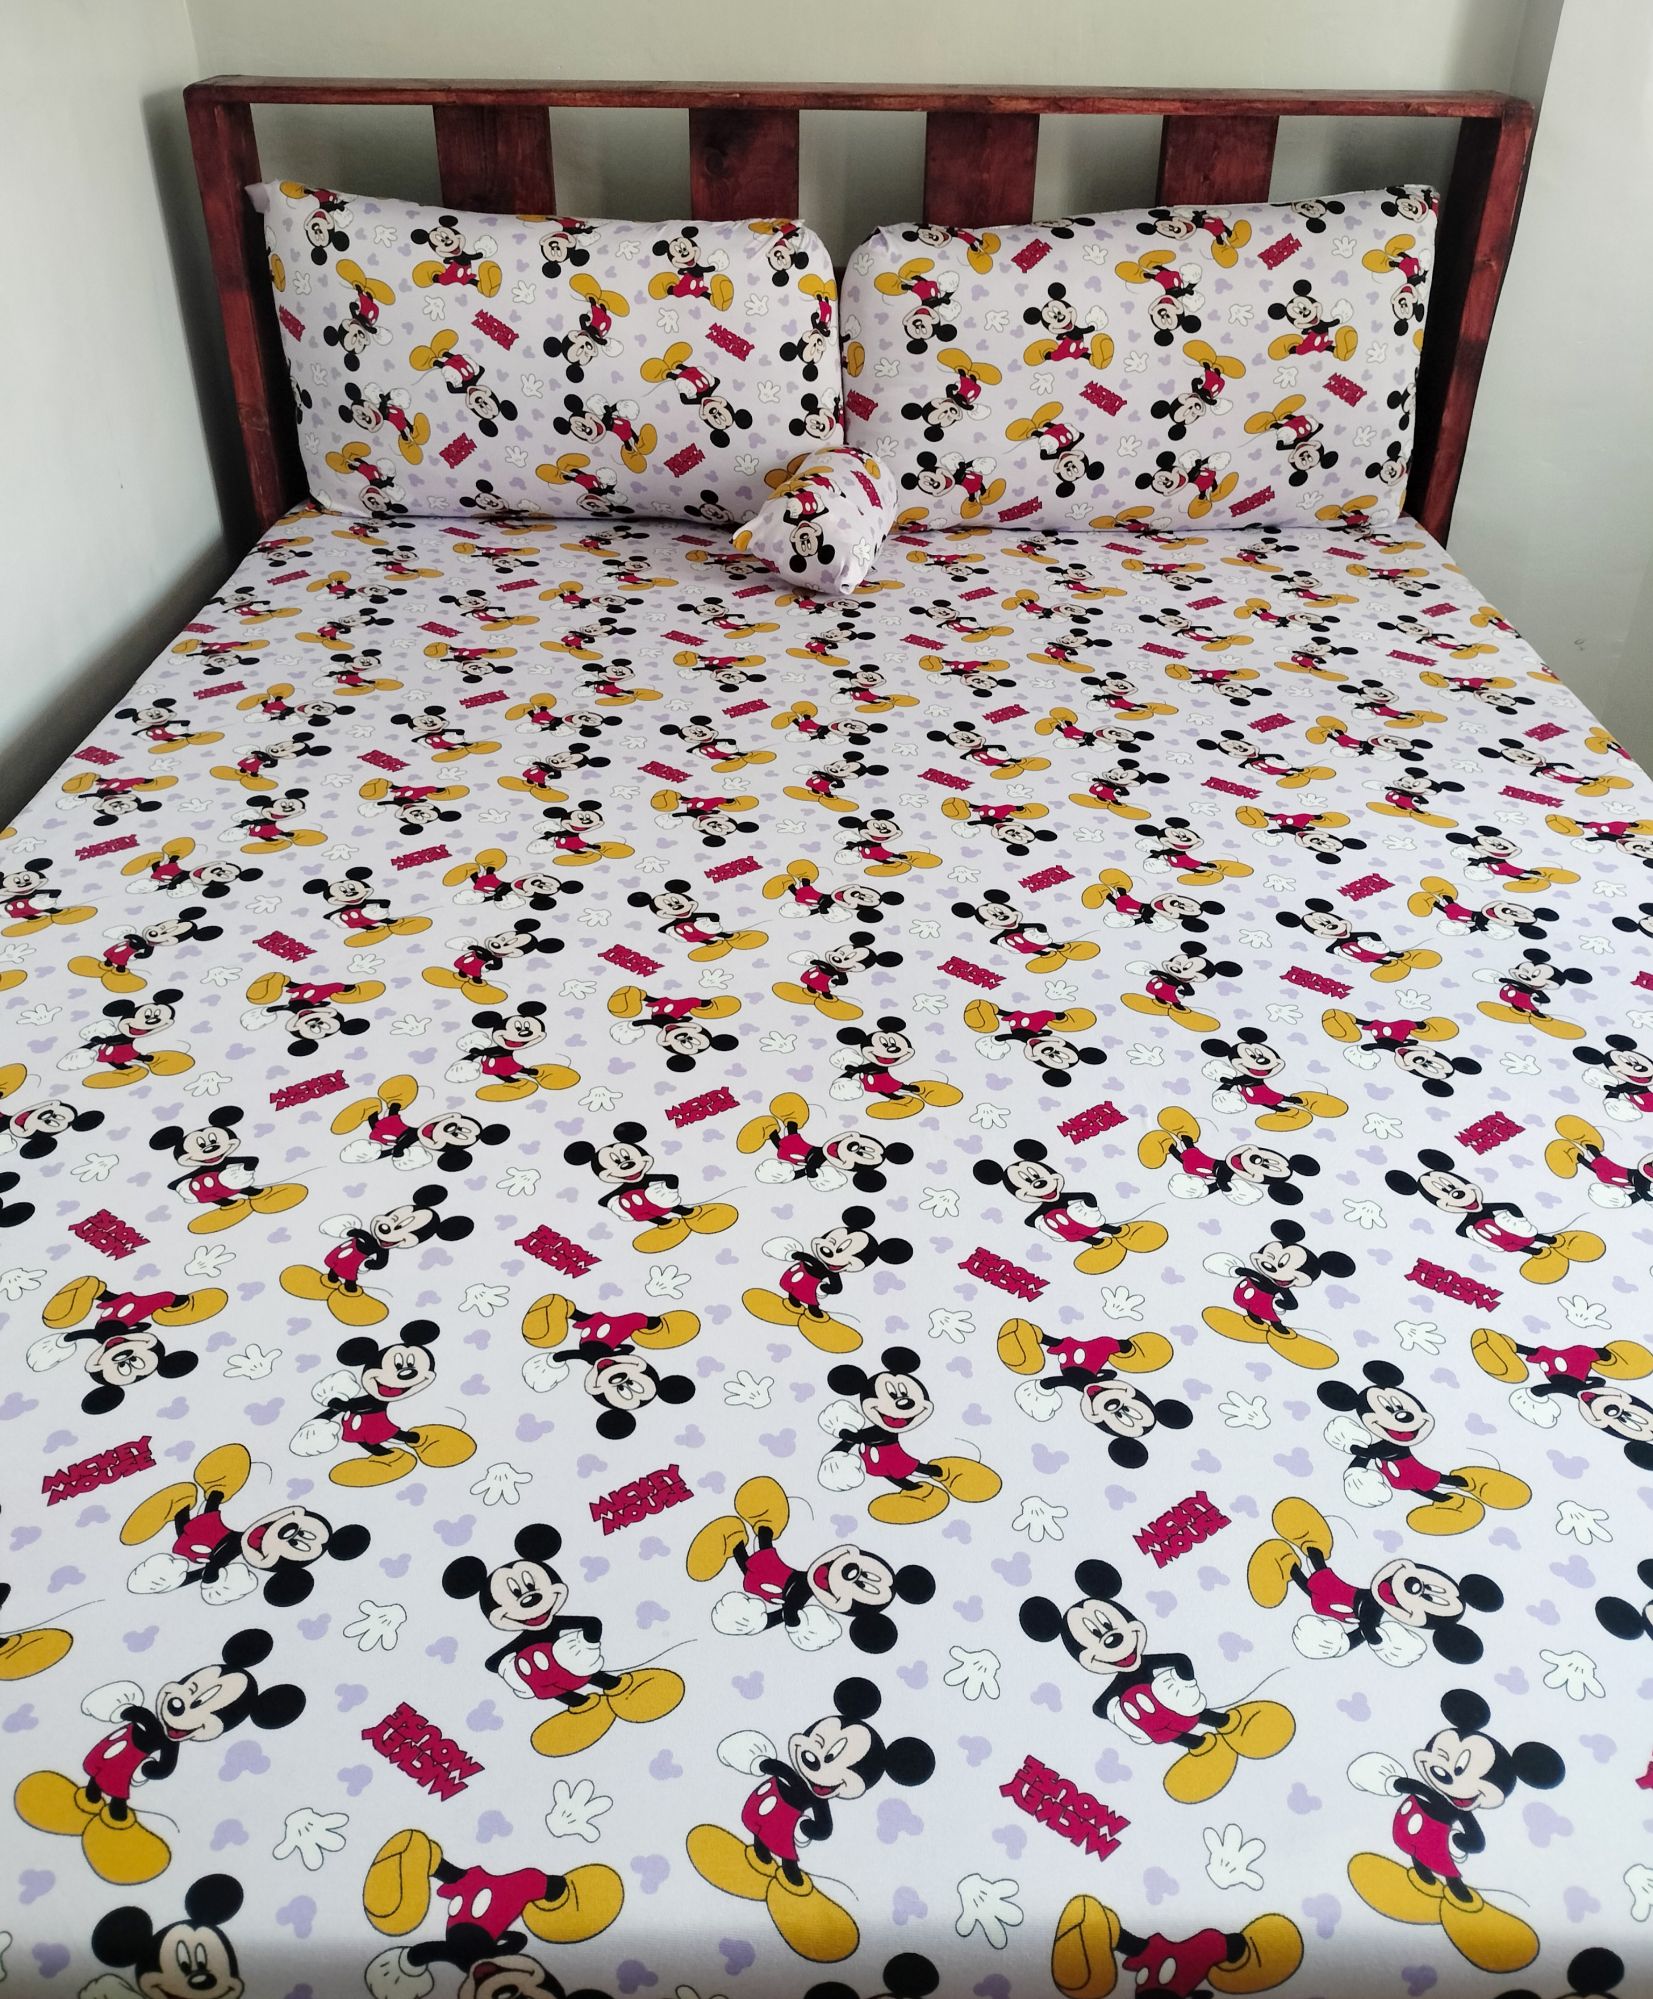 Bed matters - Serving😍😍😍 Louis Vuitton bedsheets at